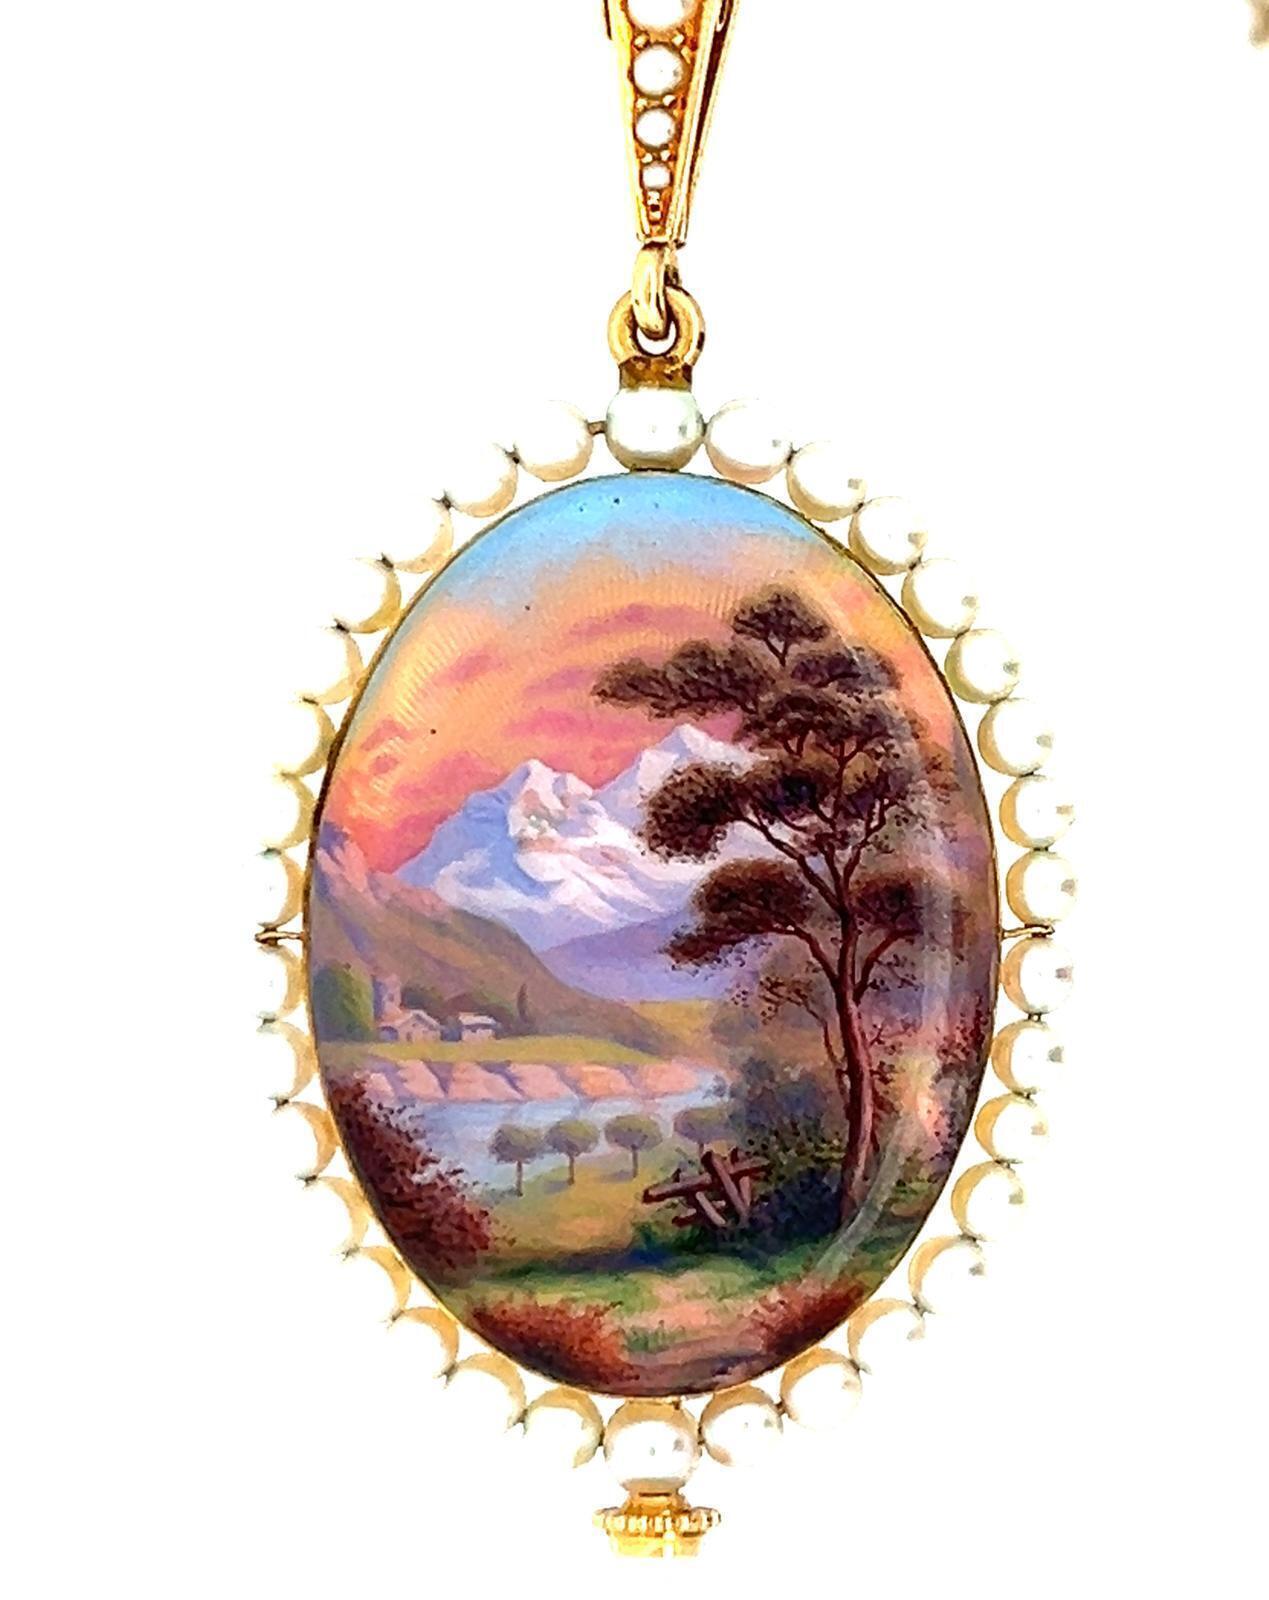 GUBELIN ENAMEL, GOLD, AND PEARL OVAL PENDANT WATCH AND CHAIN, CIRCA 1900